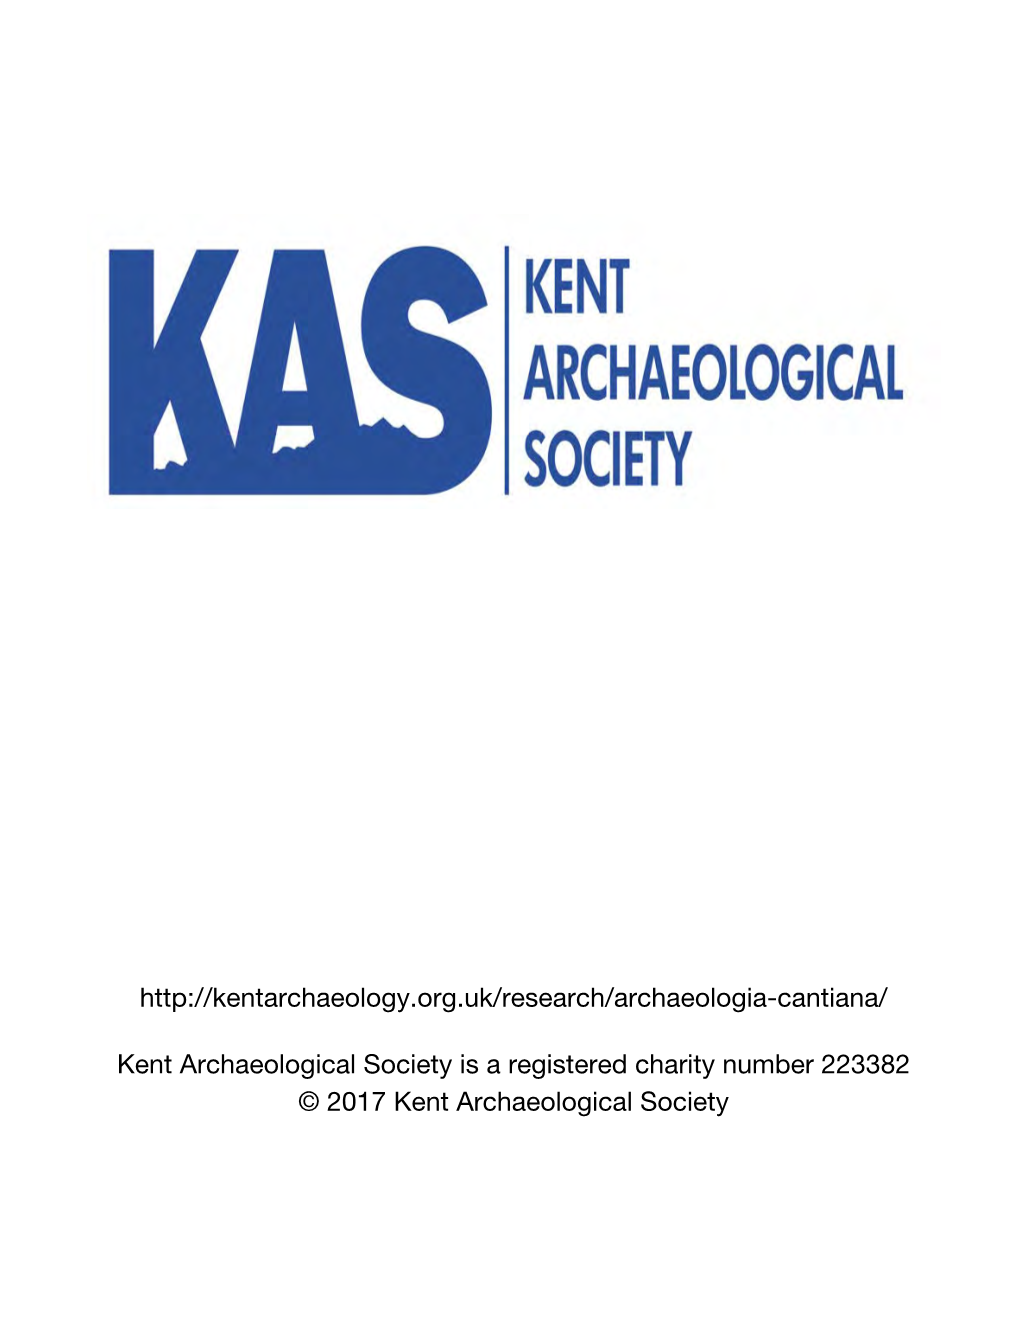 Interim Report on Work Carried out by the Canterbury Archaeological Trust*